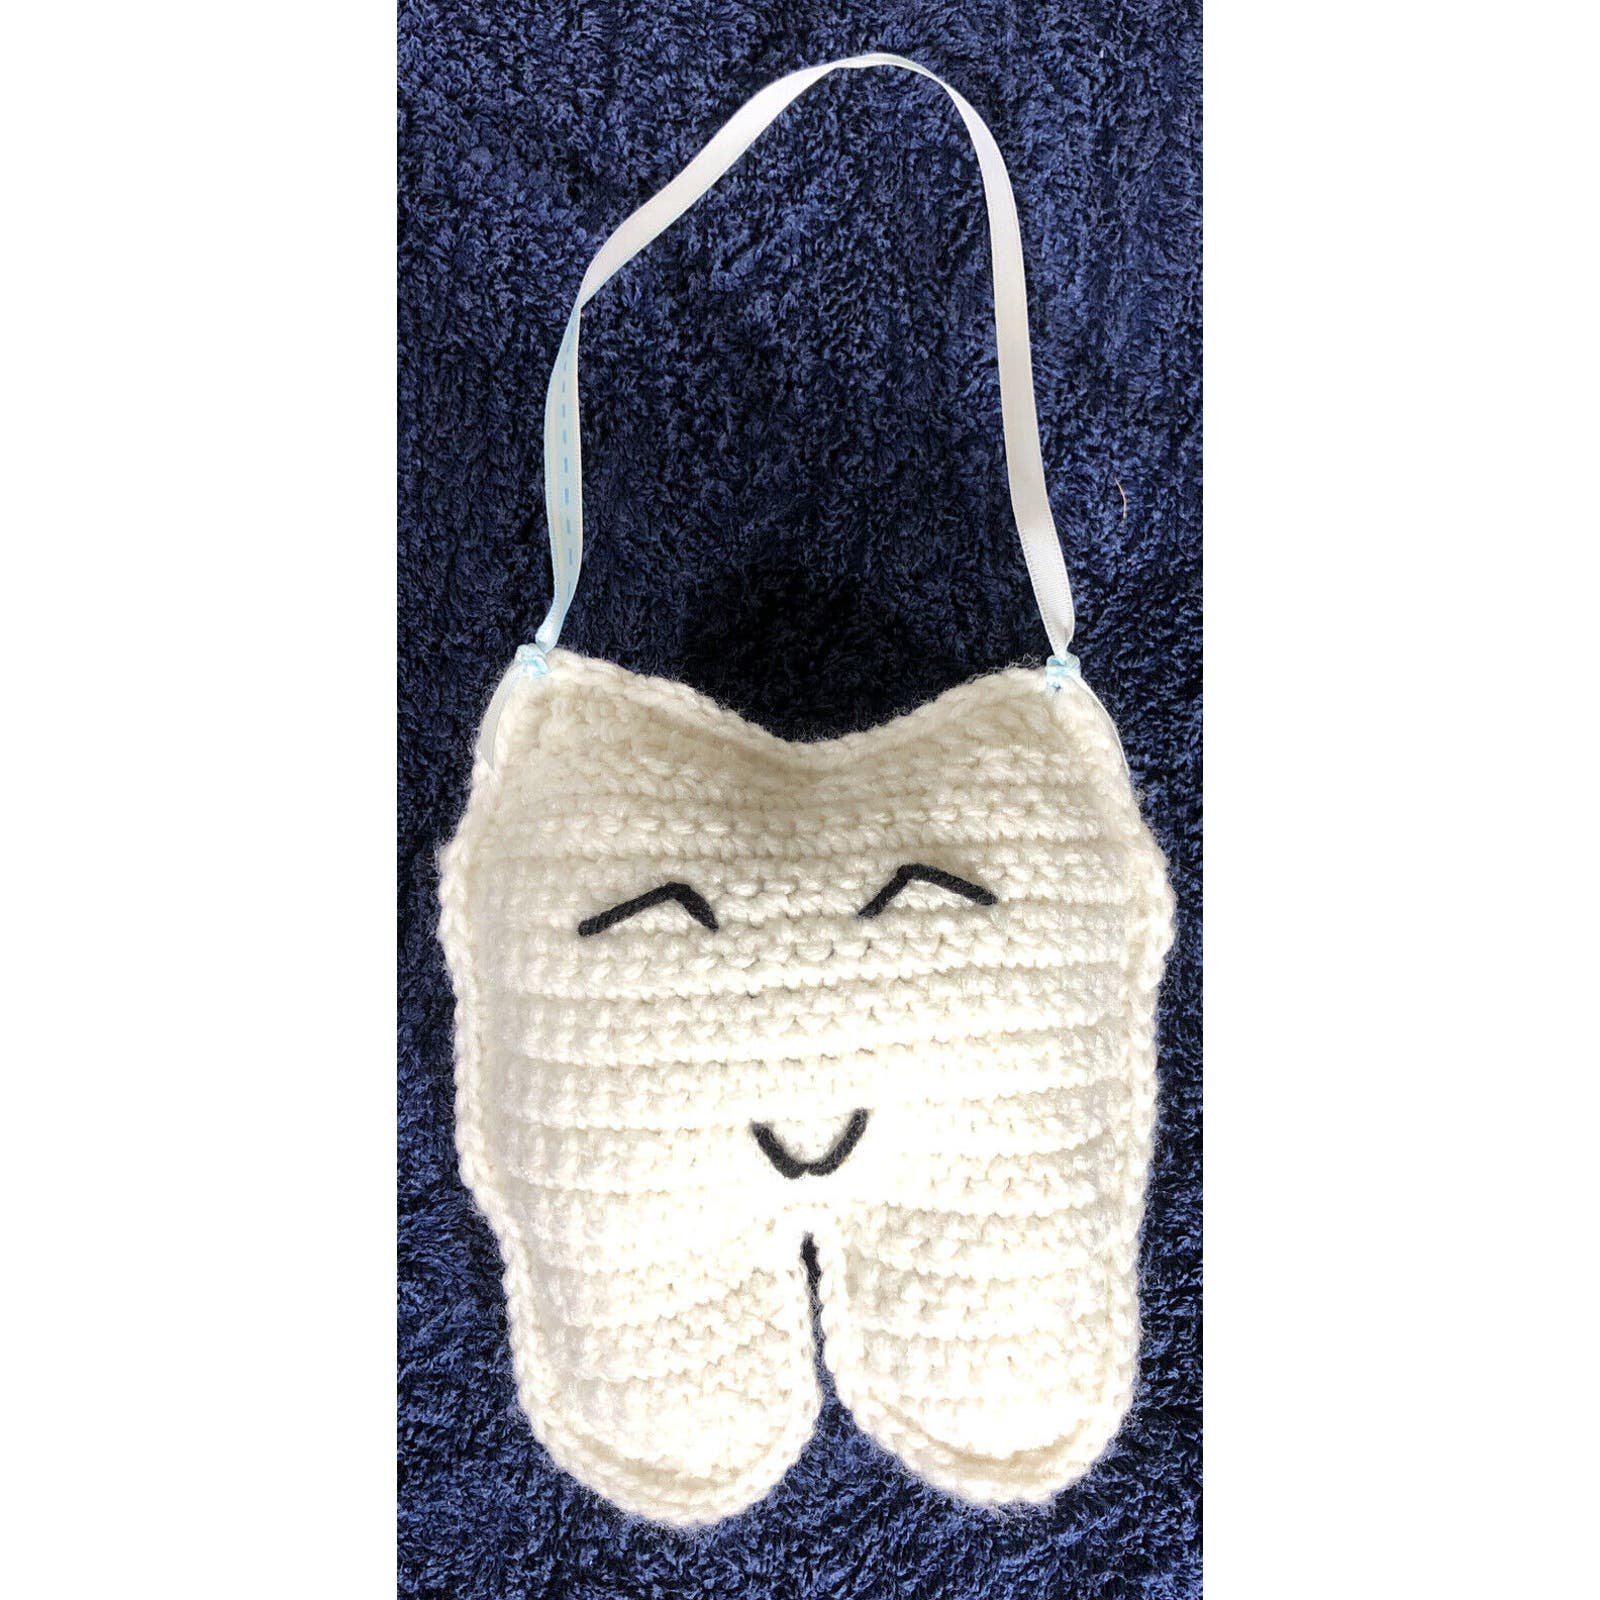 Toothfairy Crocheted Handmade Pocket Pillow Hangs on Be